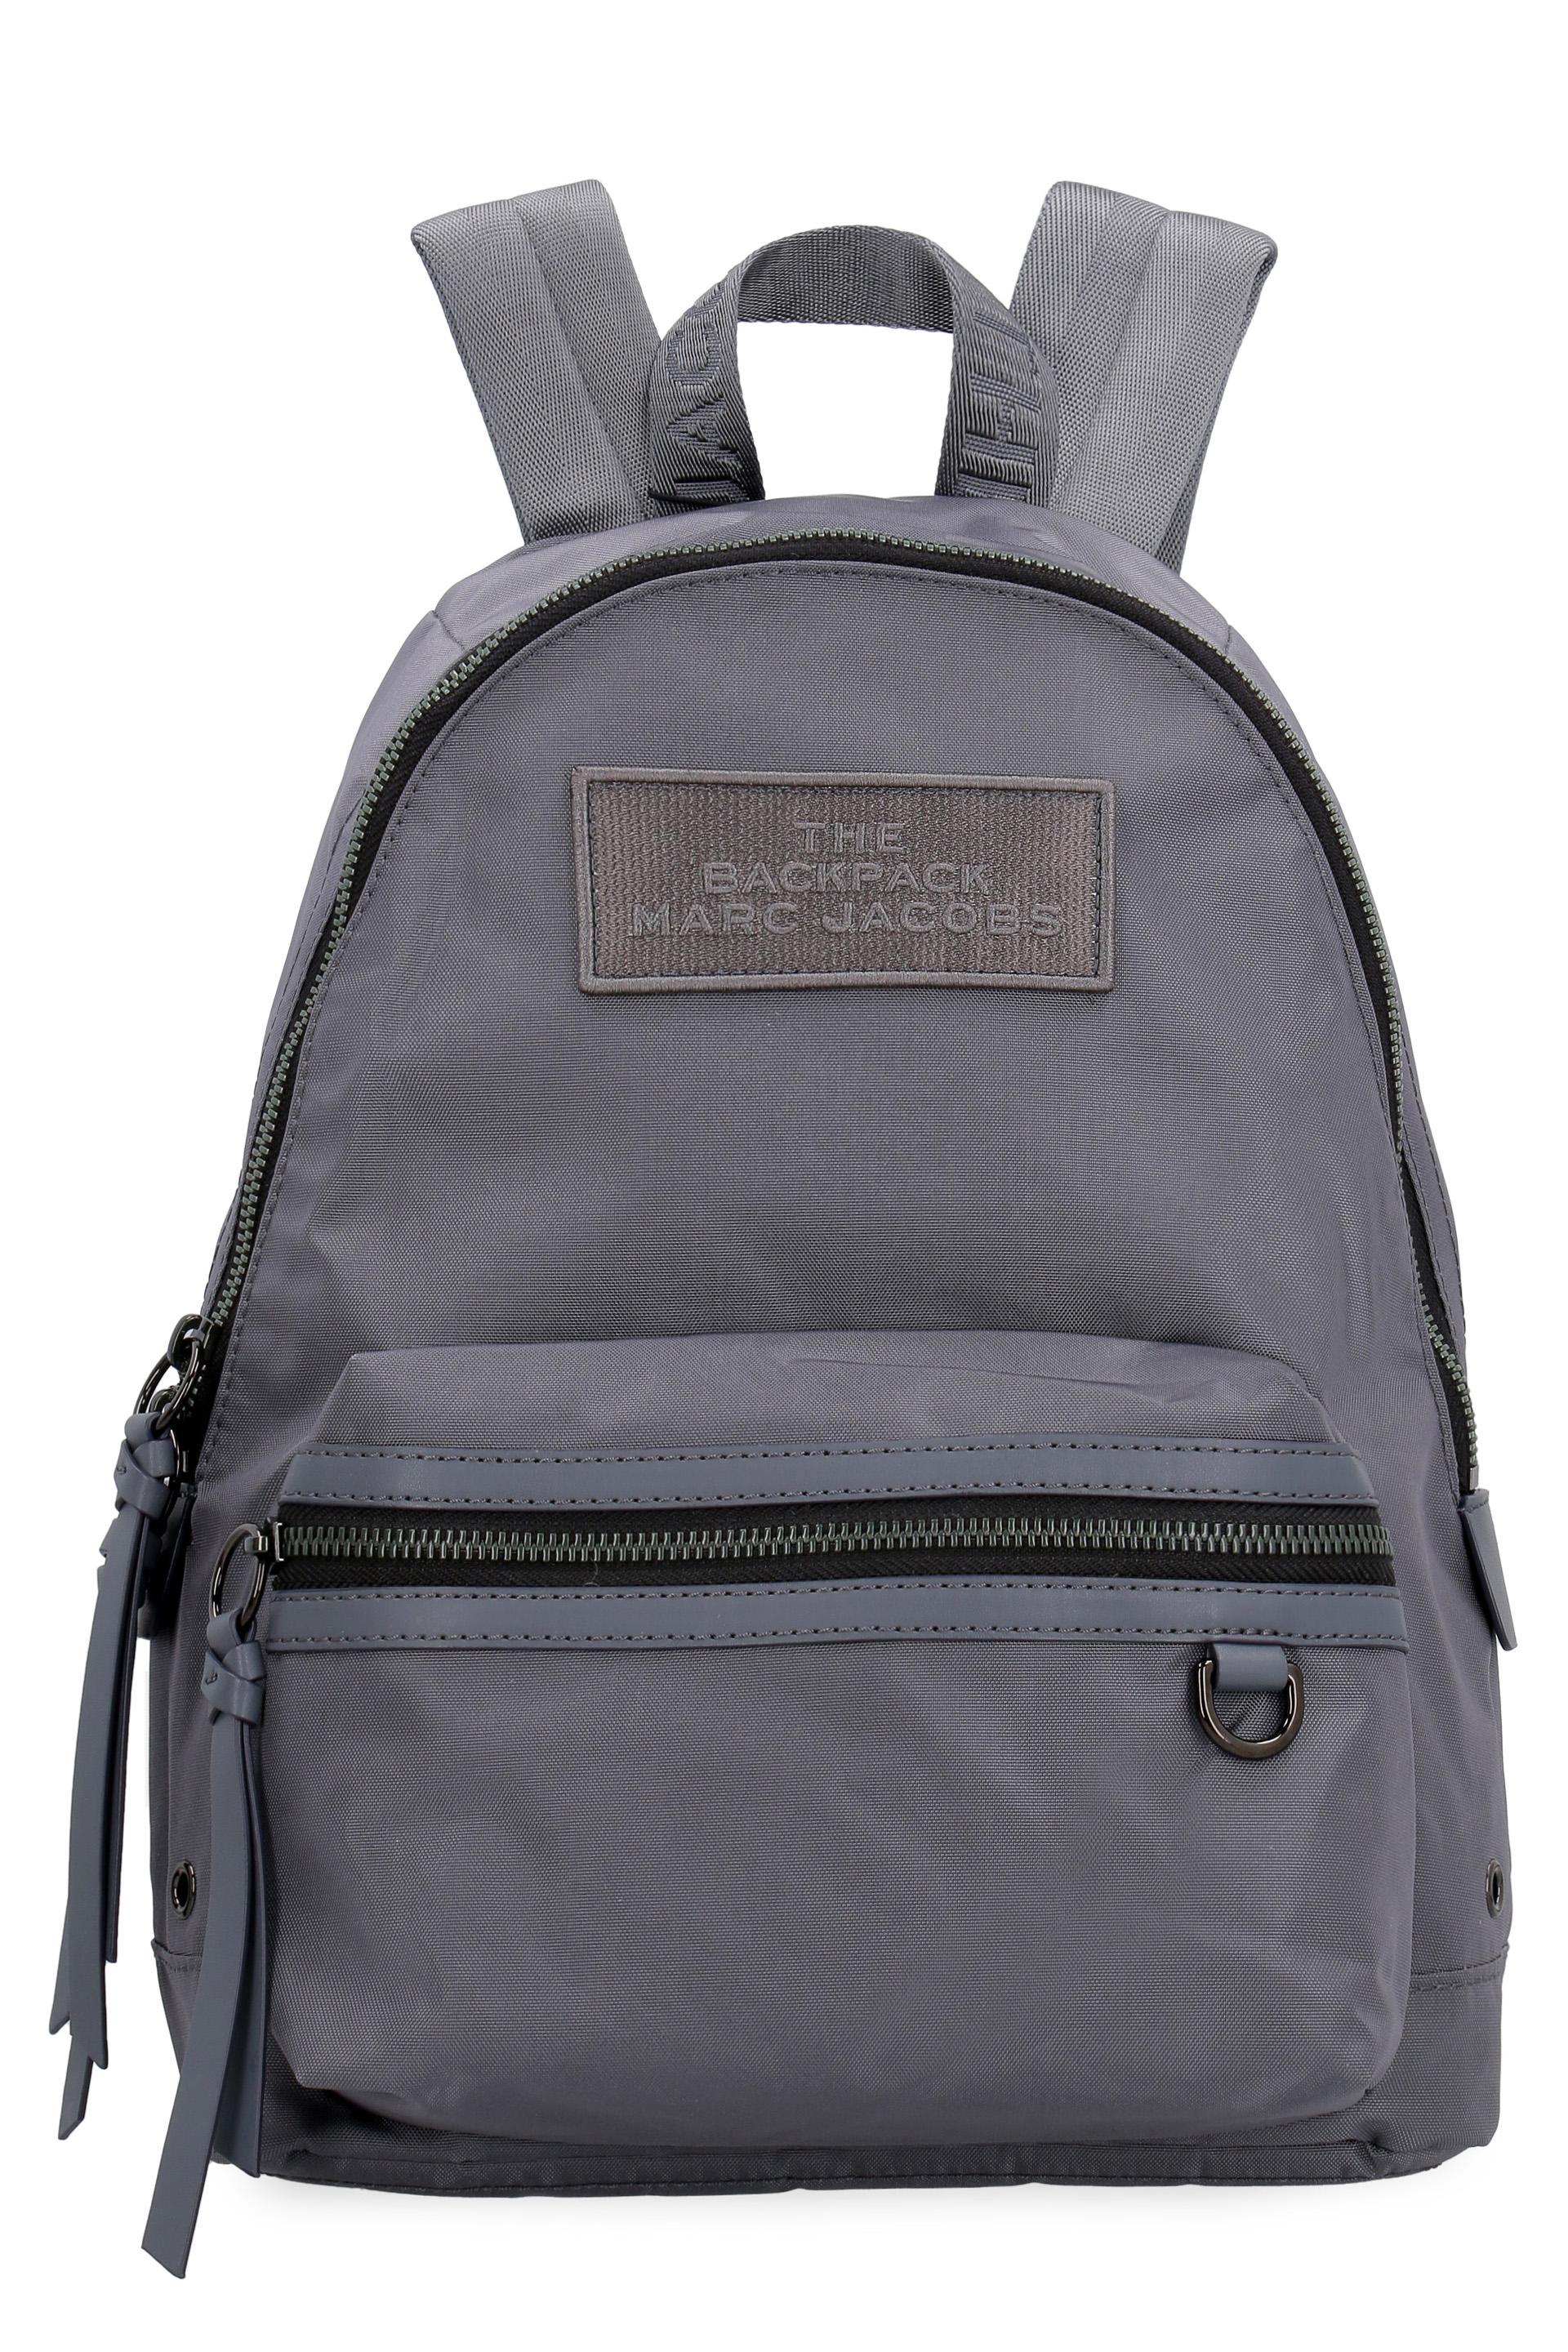 Marc Jacobs Synthetic Nylon Backpack in Grey (Gray) - Lyst